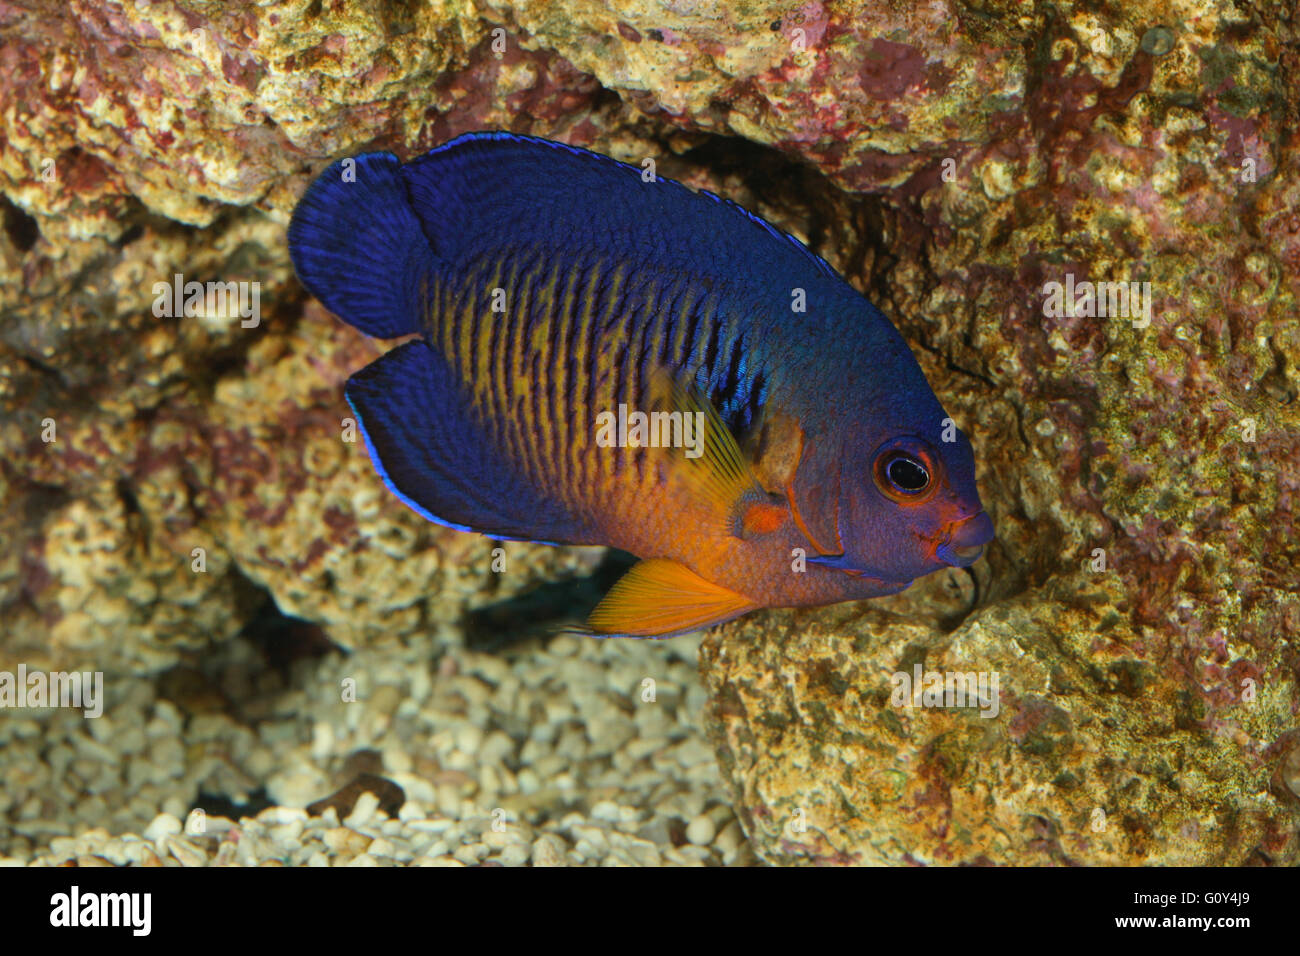 Twospined angelfish, Coral beauty, Centropyge bispinosa in reef aquarium, Emiliano Spada Stock Photo